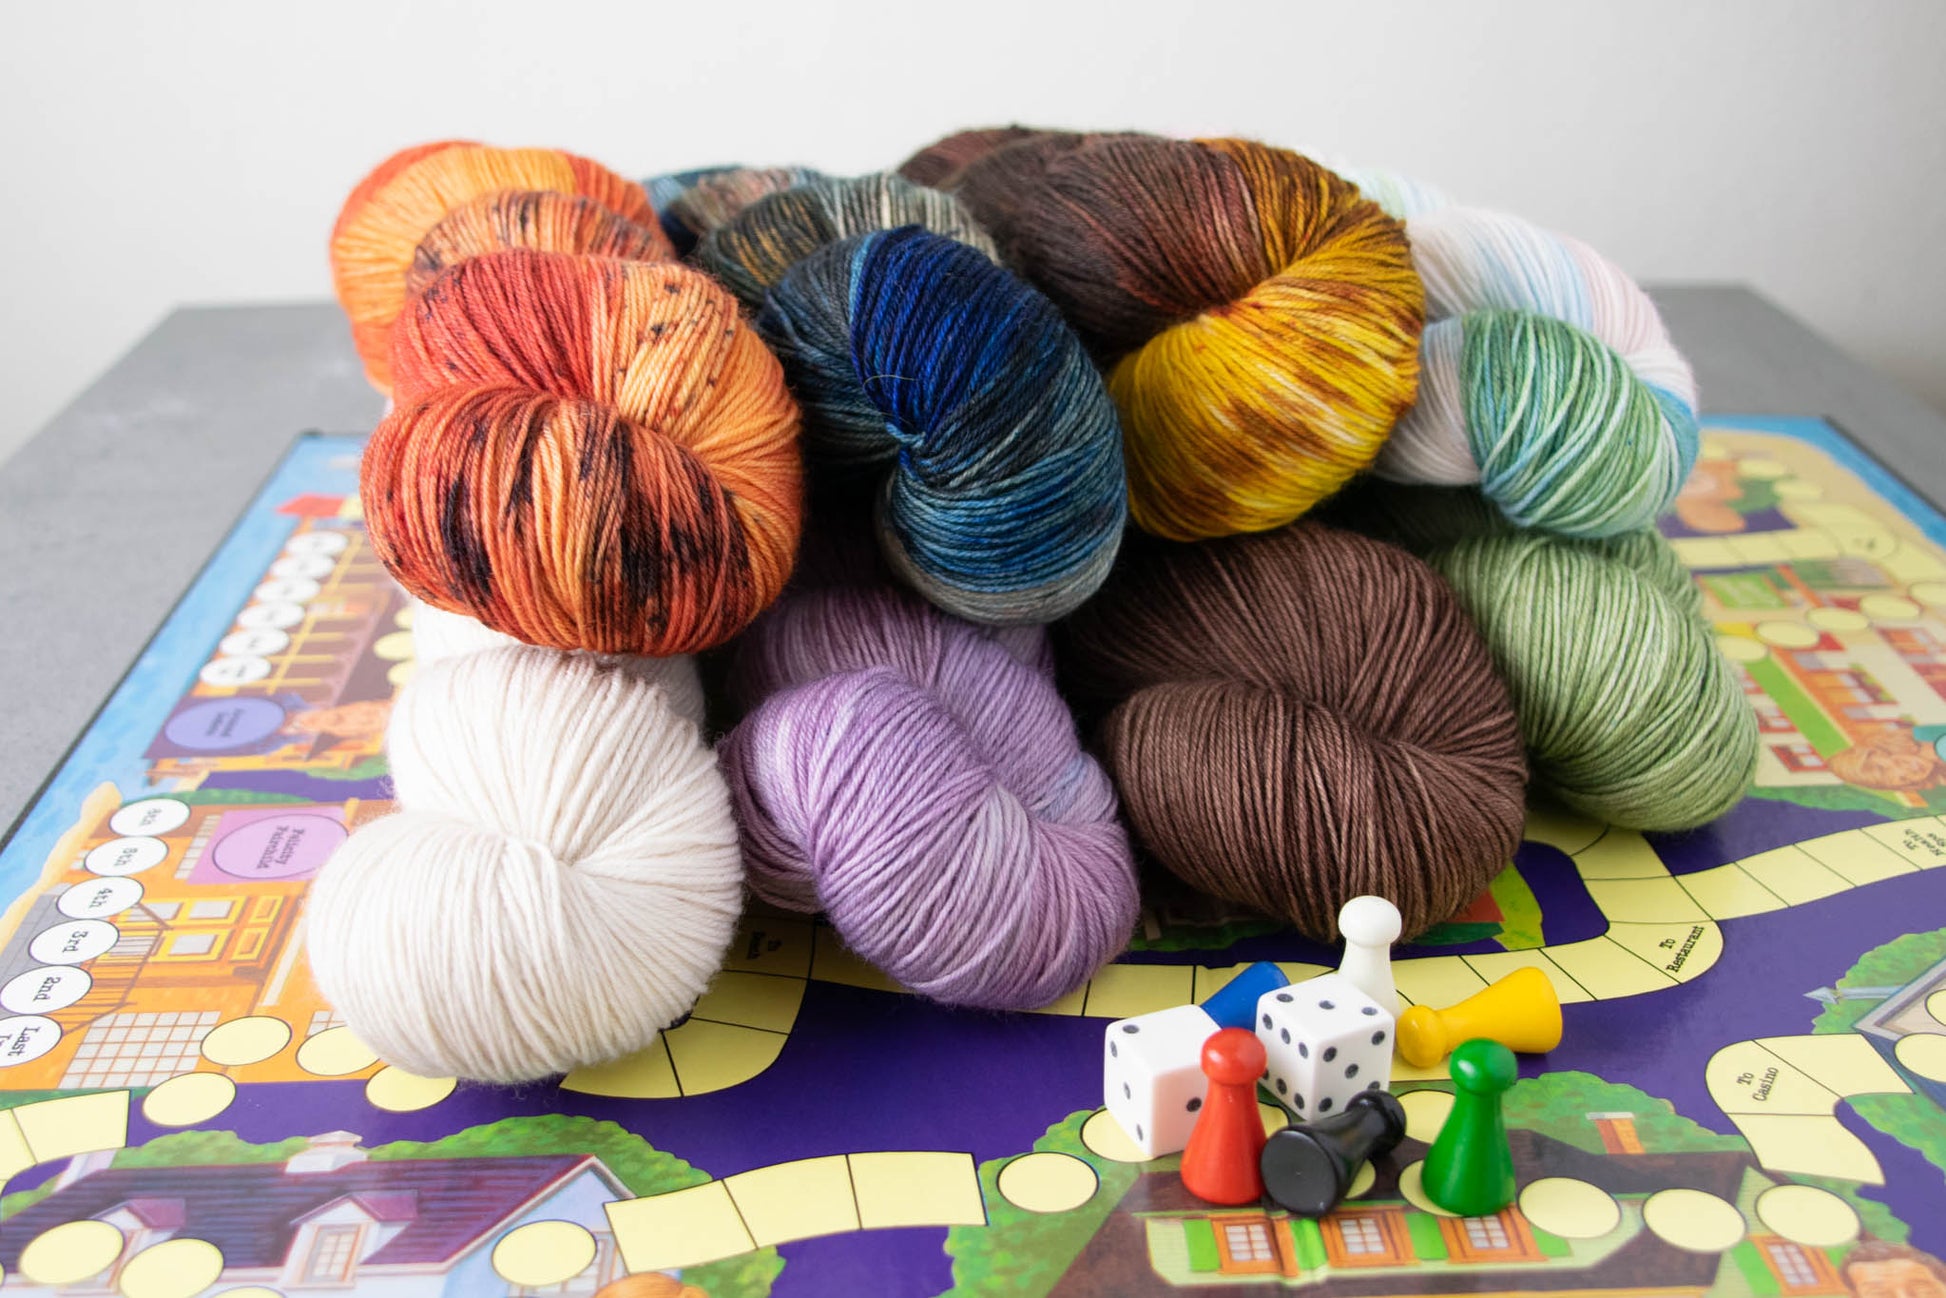 Eight skeins of hand-dyed wool yarn on a vintage board game with wooden pieces and dice.